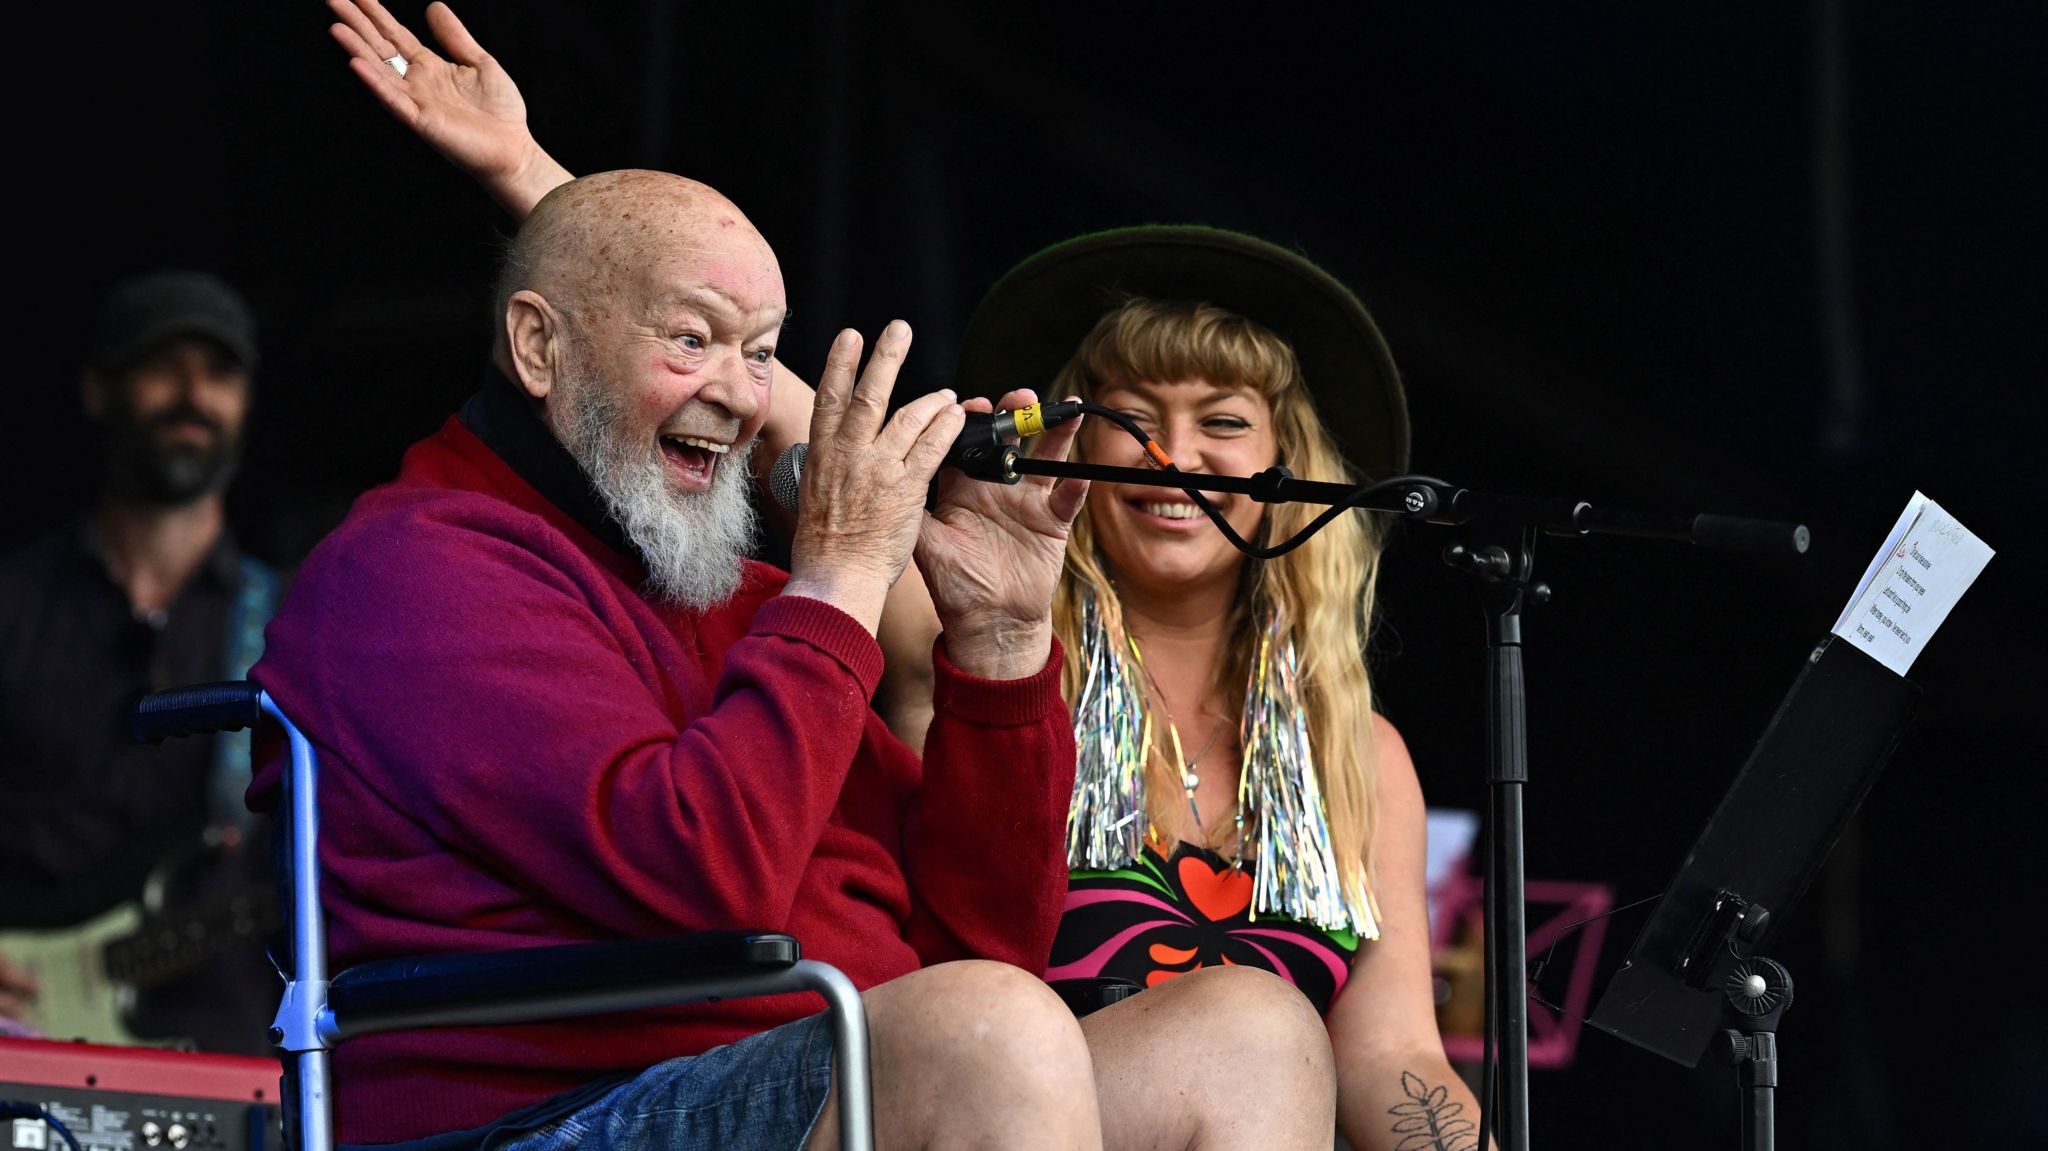 Image of Sir Michael Eavis on stage at Glastonbury. He is pictured wearing a red jumper. He is holding a microphone and smiling at the crowd. 